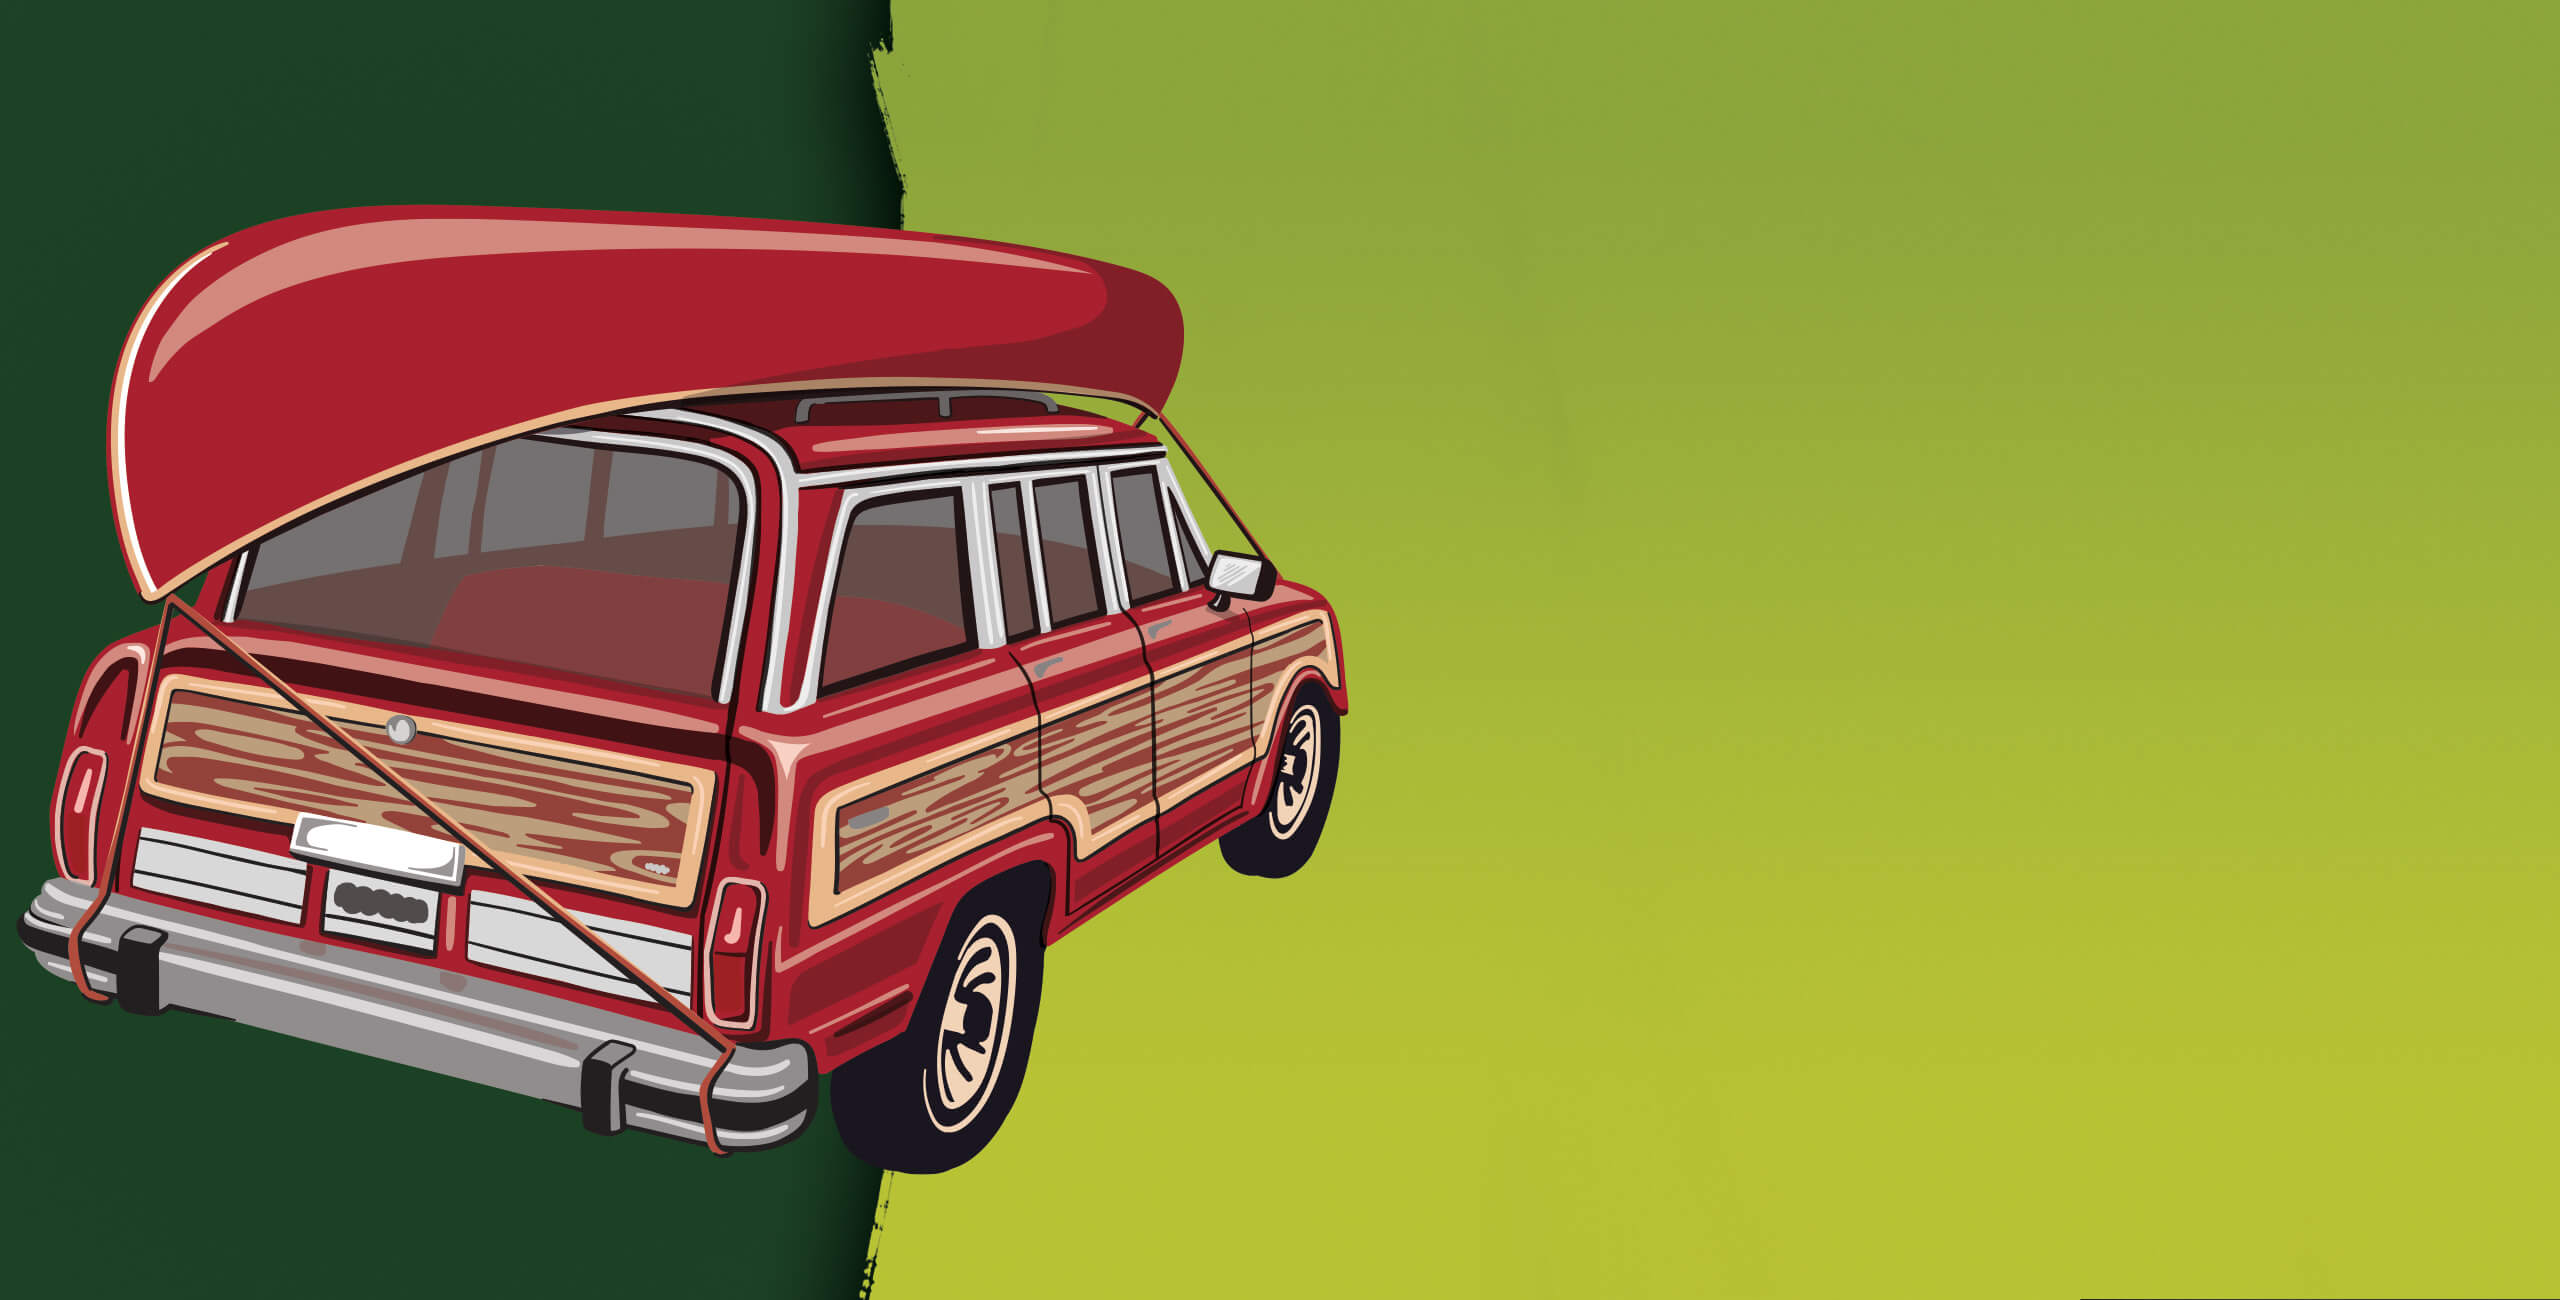 All Day IPA series green background with illustration of a car with a canoe on top